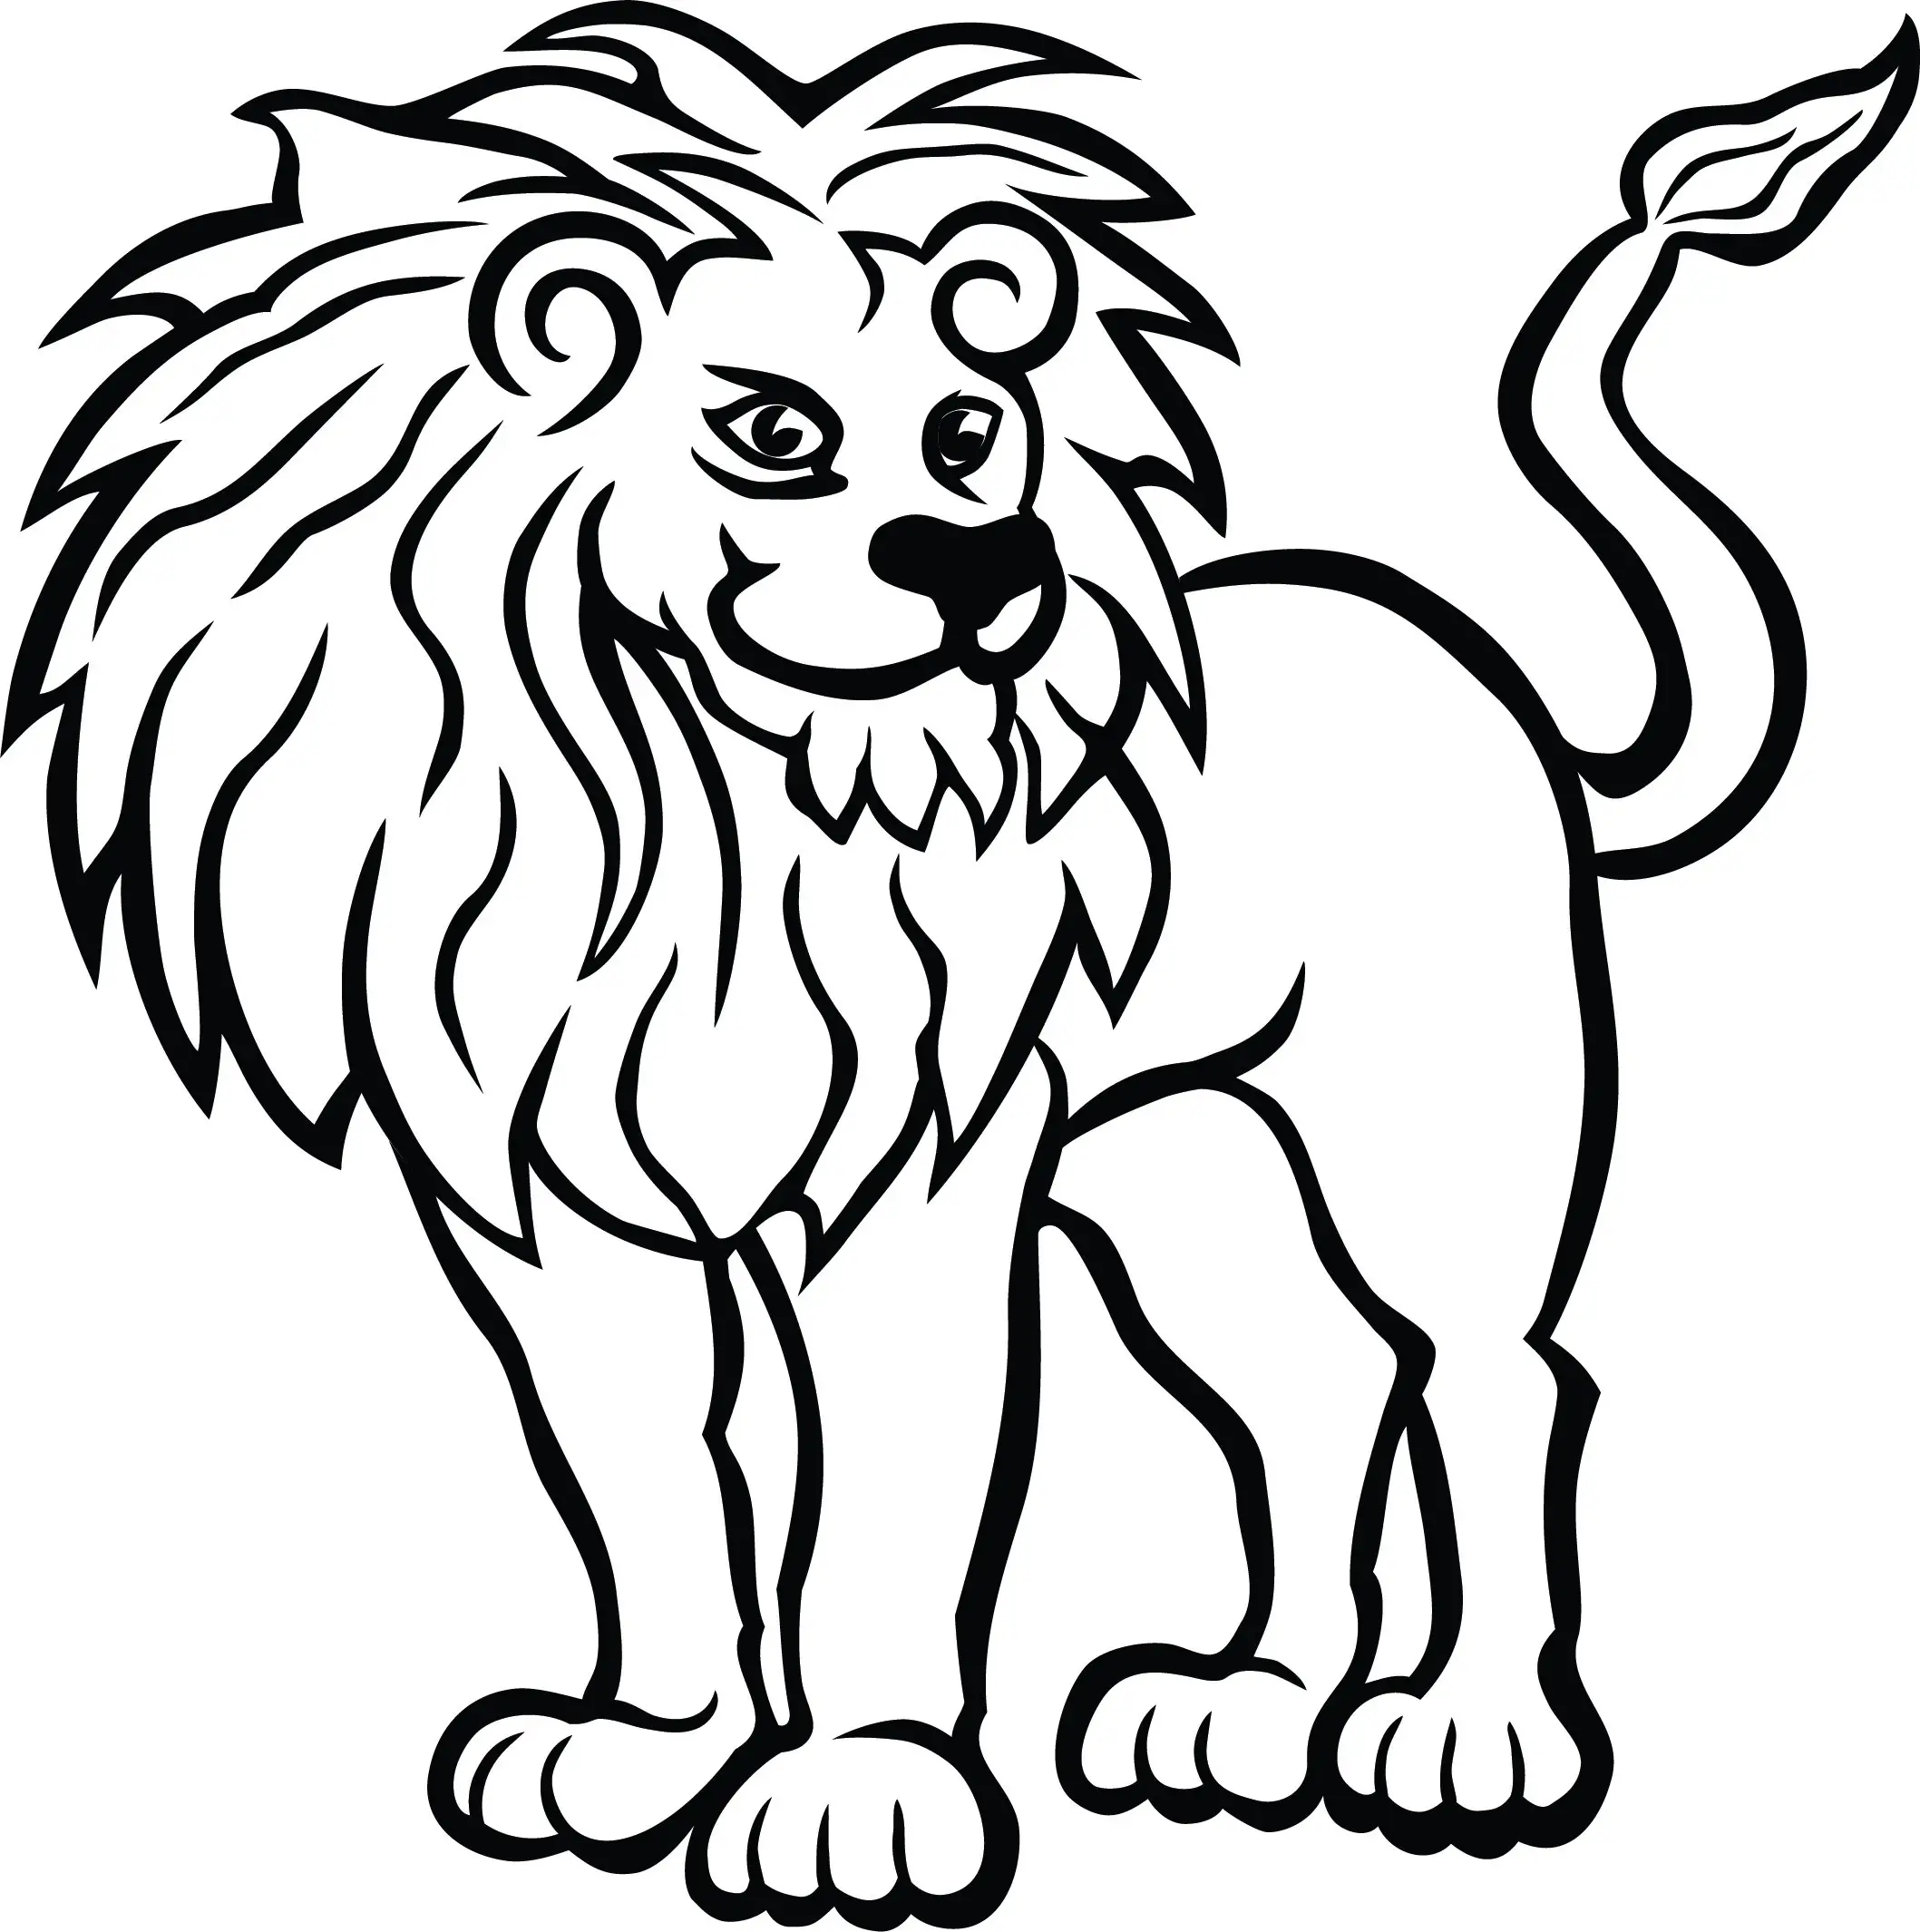 Simple Easy Lion Line Drawing Coloring Page for Kids